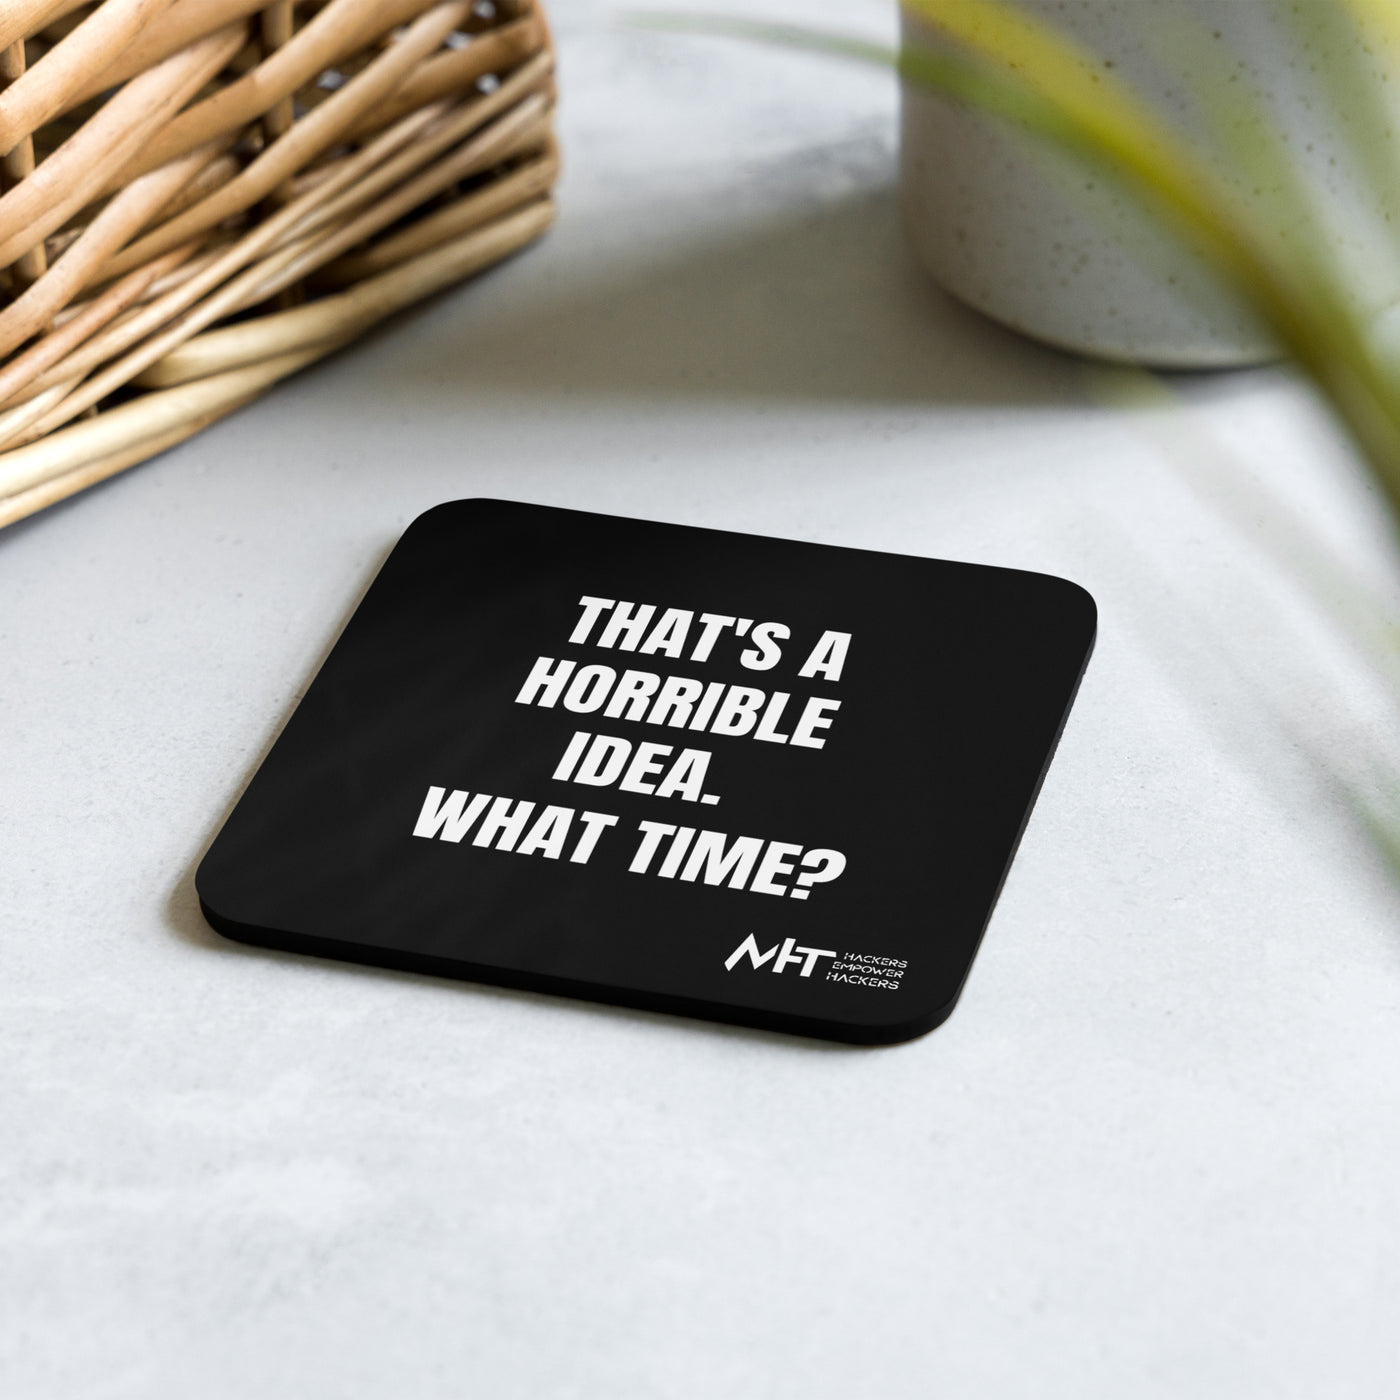 That's a horrible idea. What time? - Cork-back coaster